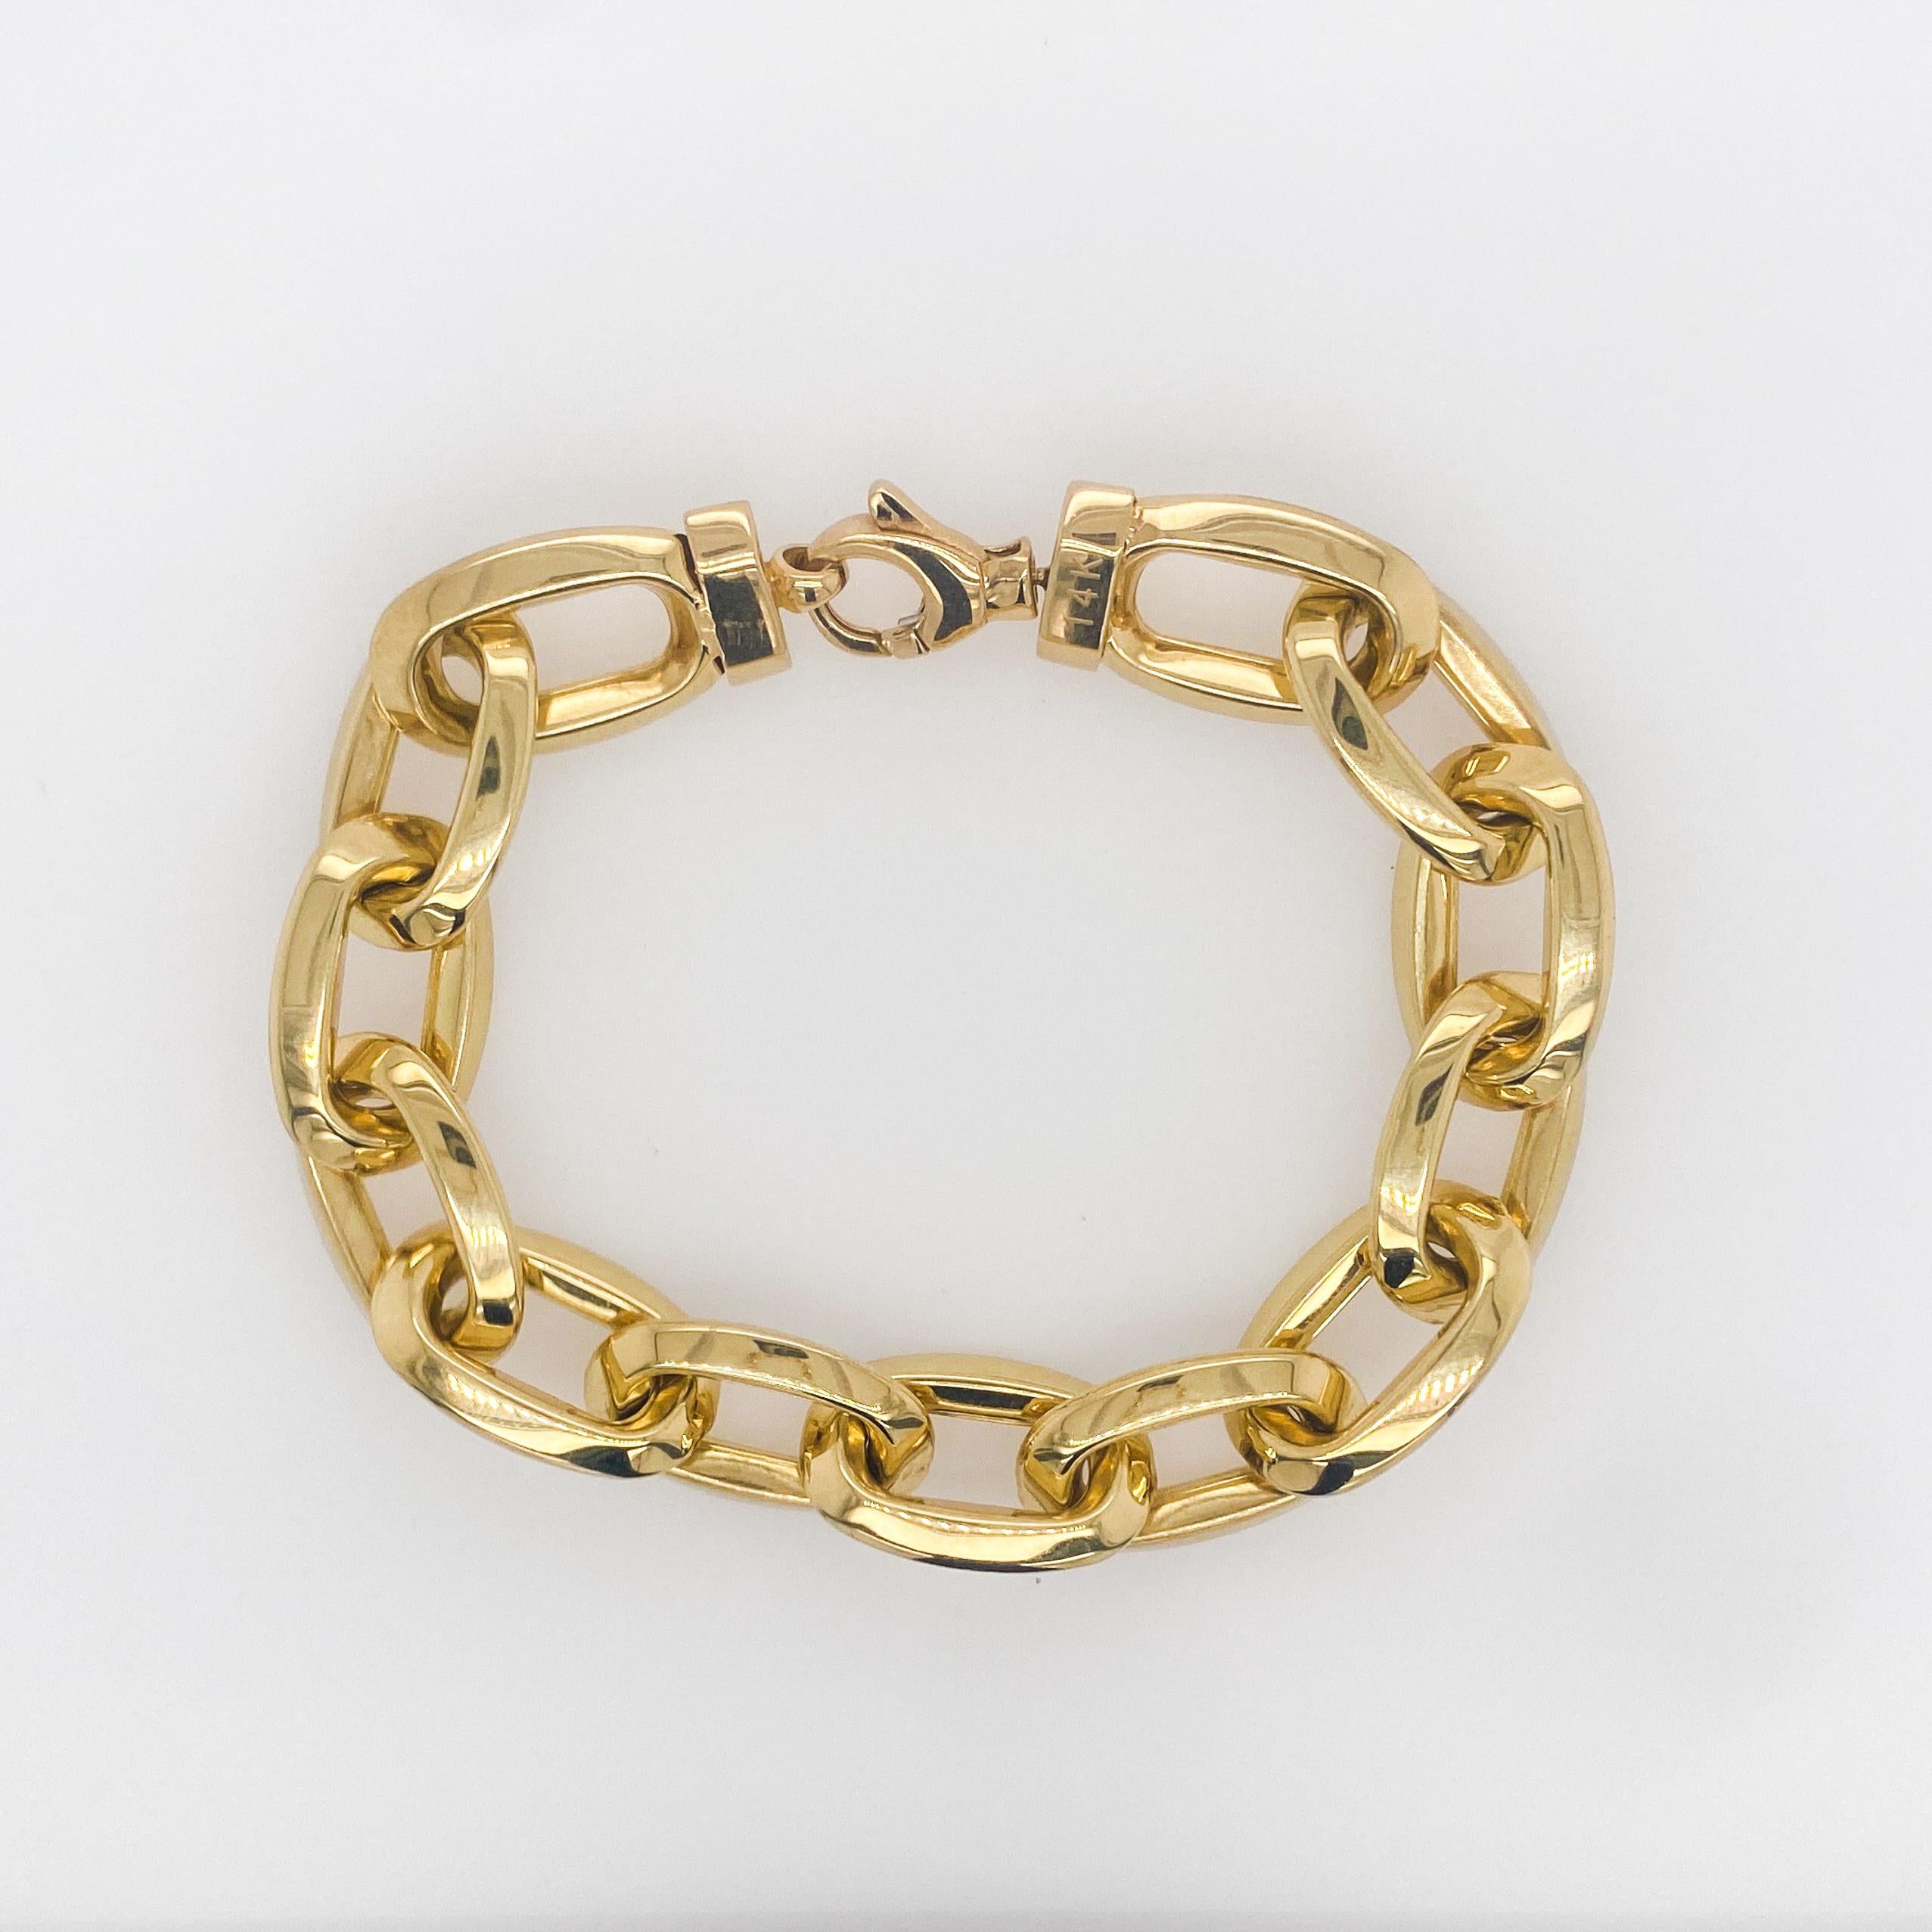 The latest fine jewelry trend! This 14K yellow gold bracelet matches everything and is the perfect addition to any outfit, casual or formal. This is the latest design for us-bold and lovely on any wrist. This bracelet would make the perfect gift got